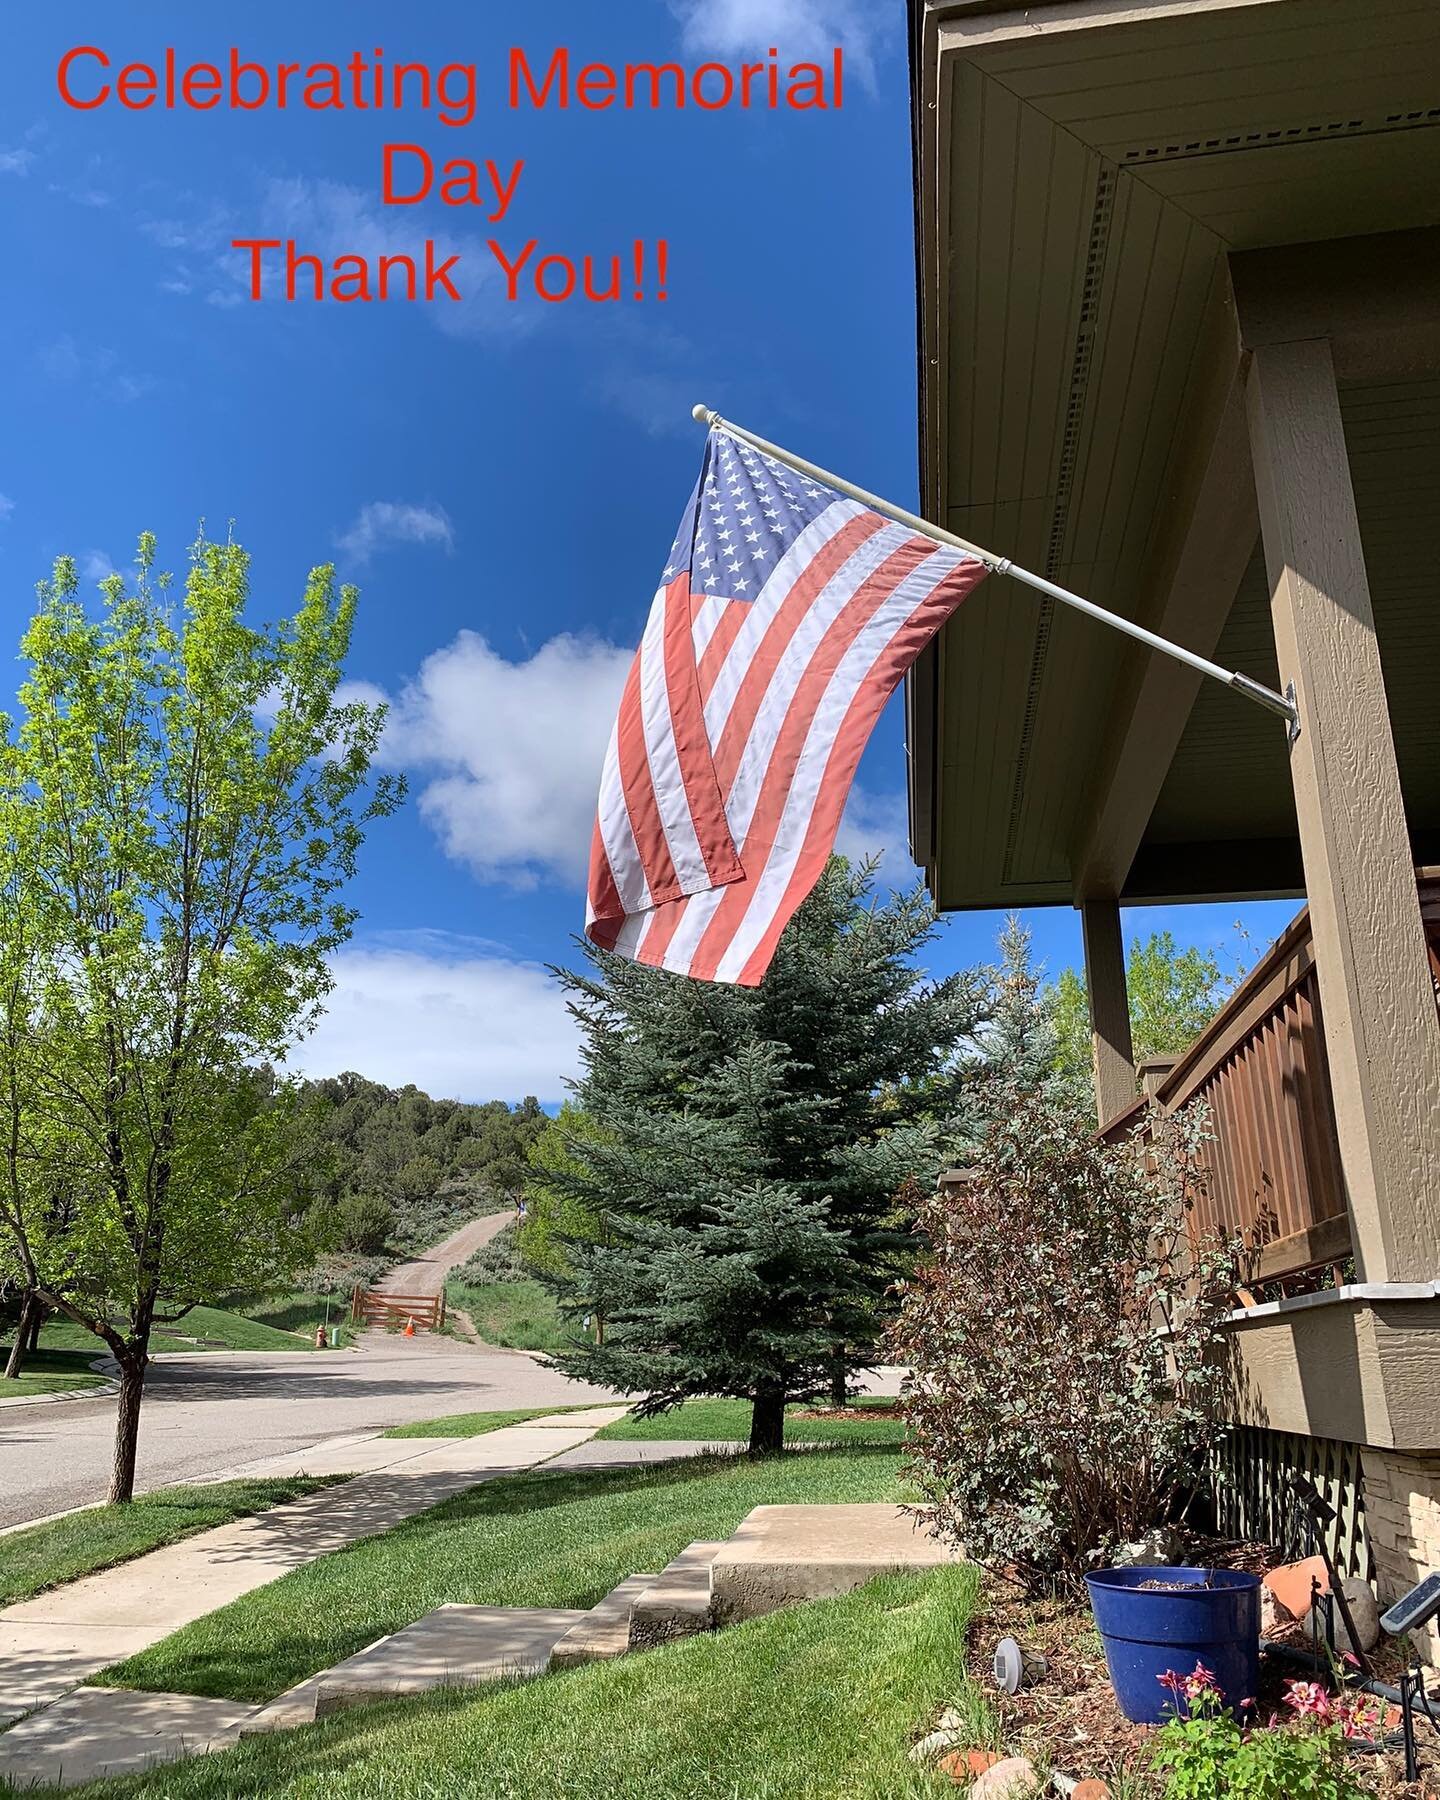 Early snow in Vail and sunny skies later in Eagle. You&rsquo;ve got to love spring time in Colorado. #memorialday #spring #remember #vail #eagle #mountainlife